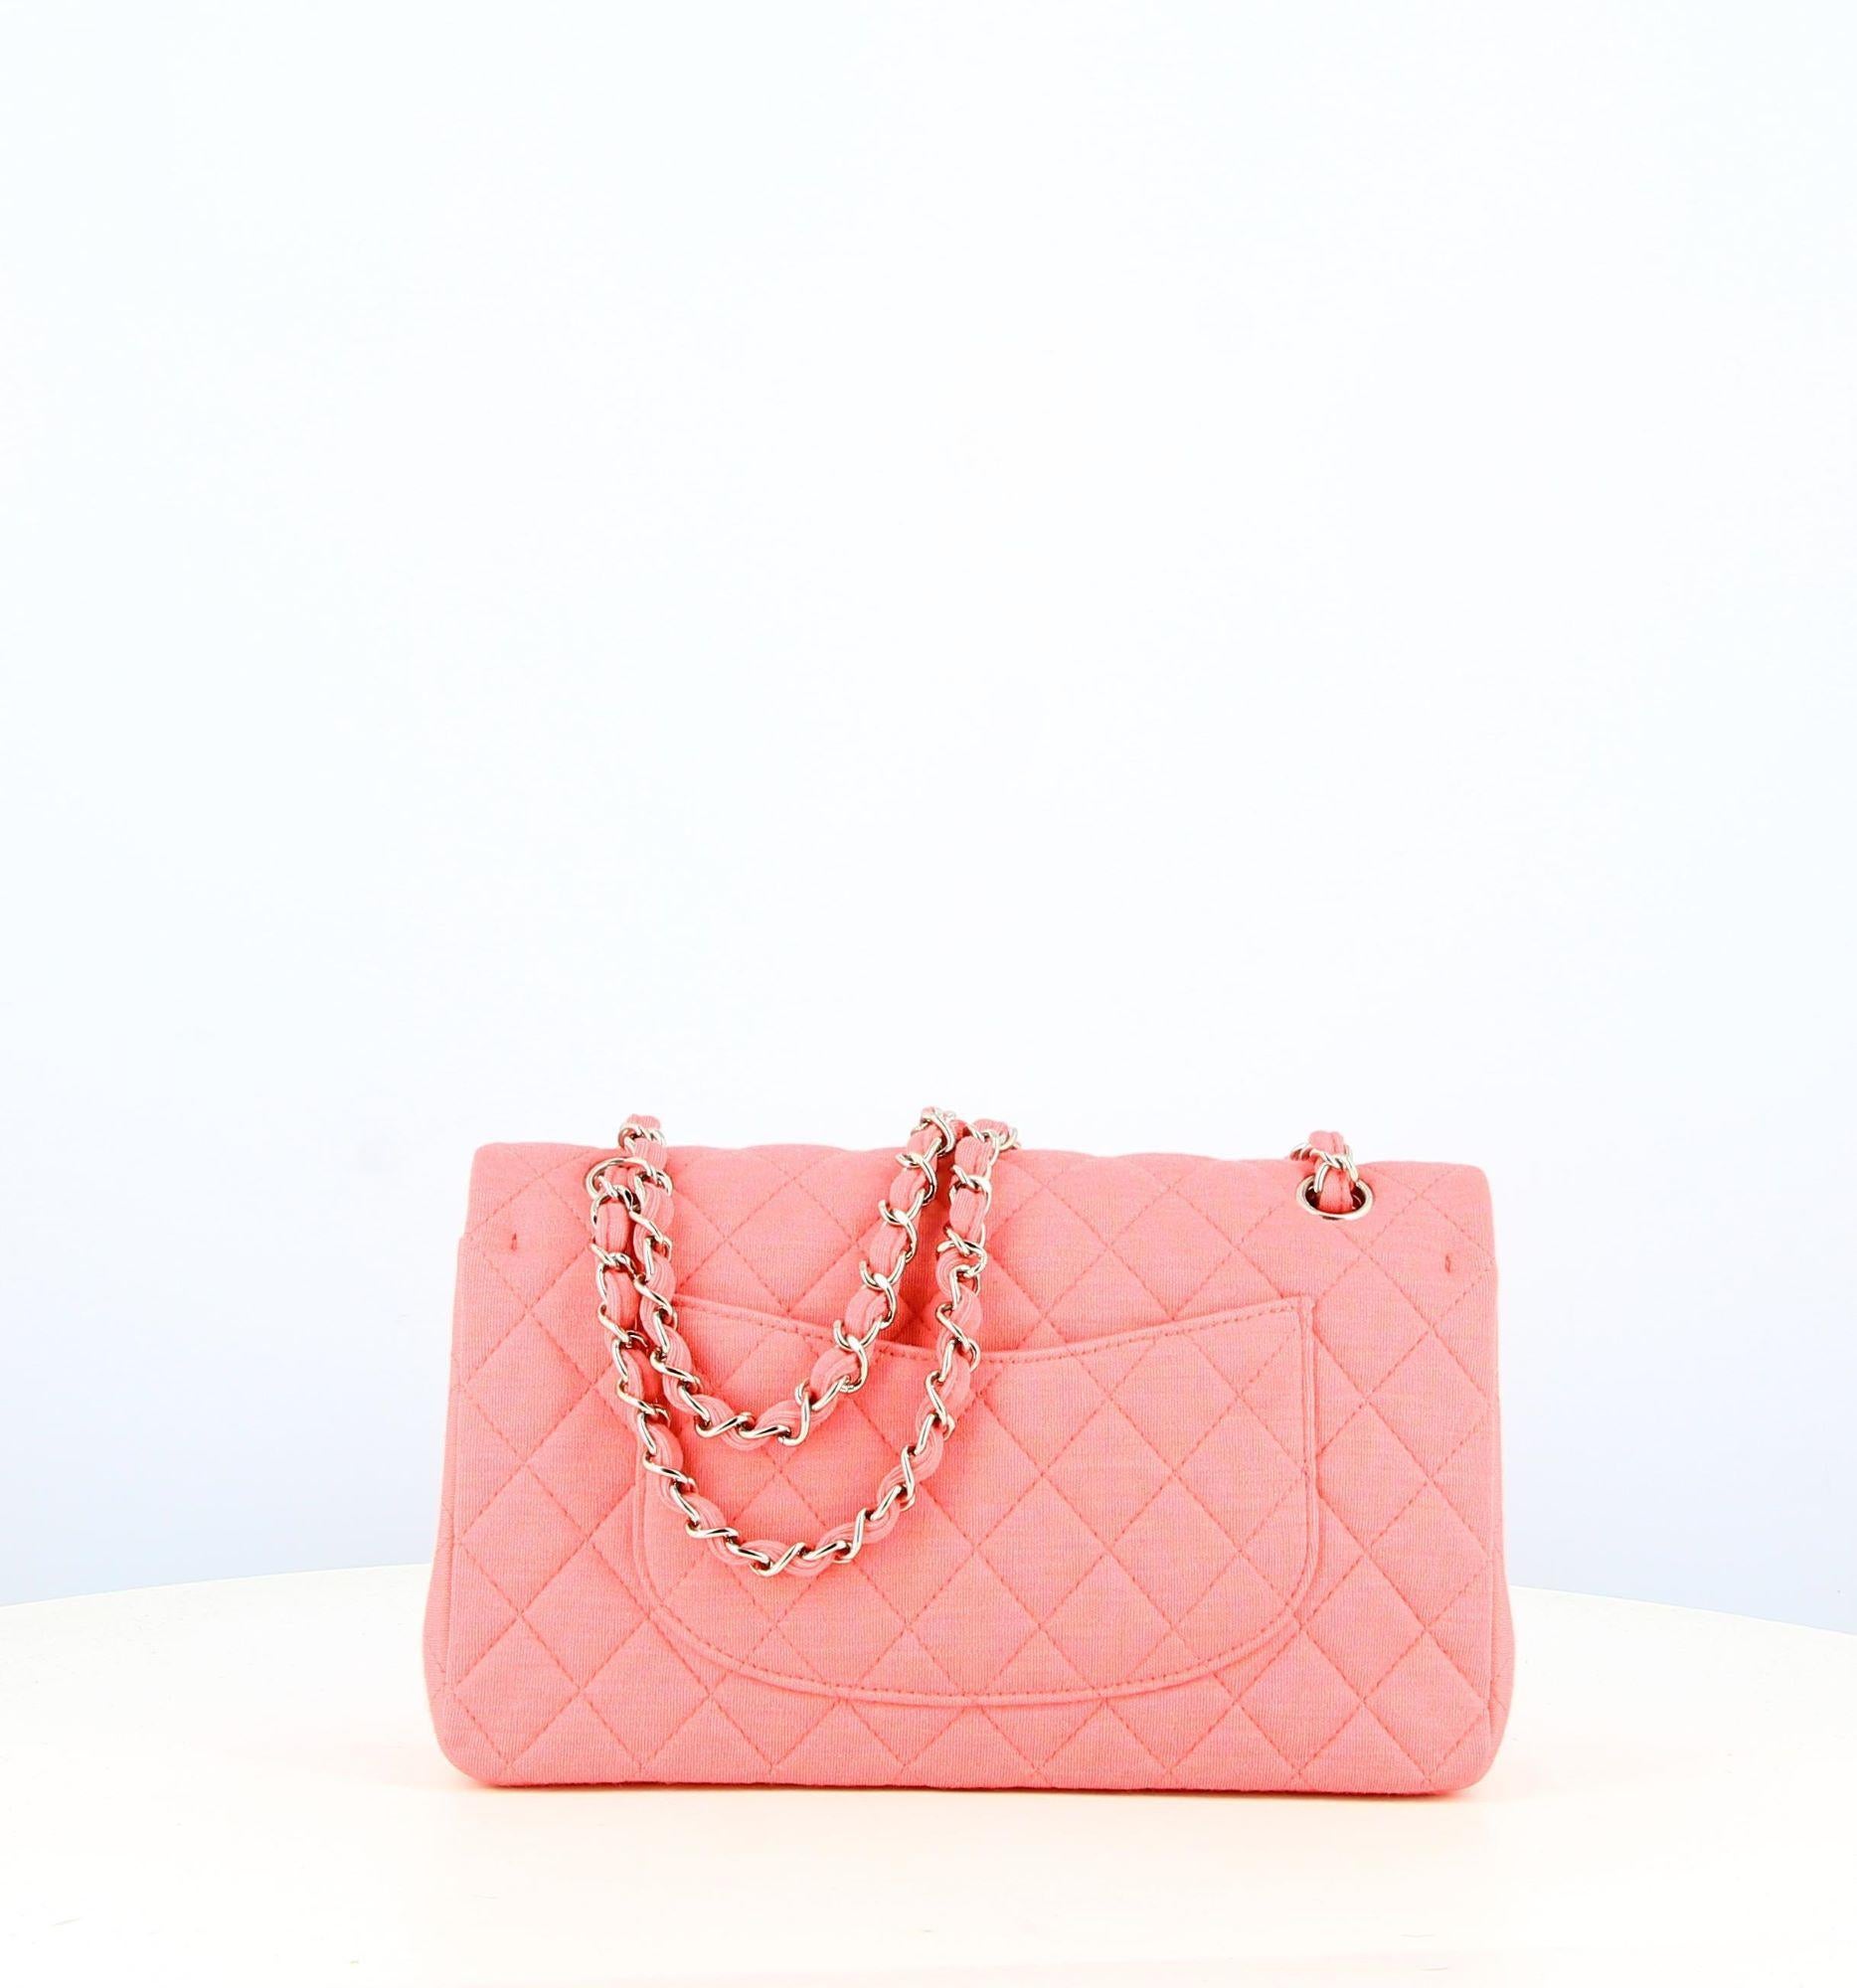 Women's or Men's 2014 Chanel Pink Quilted Bag Timeless